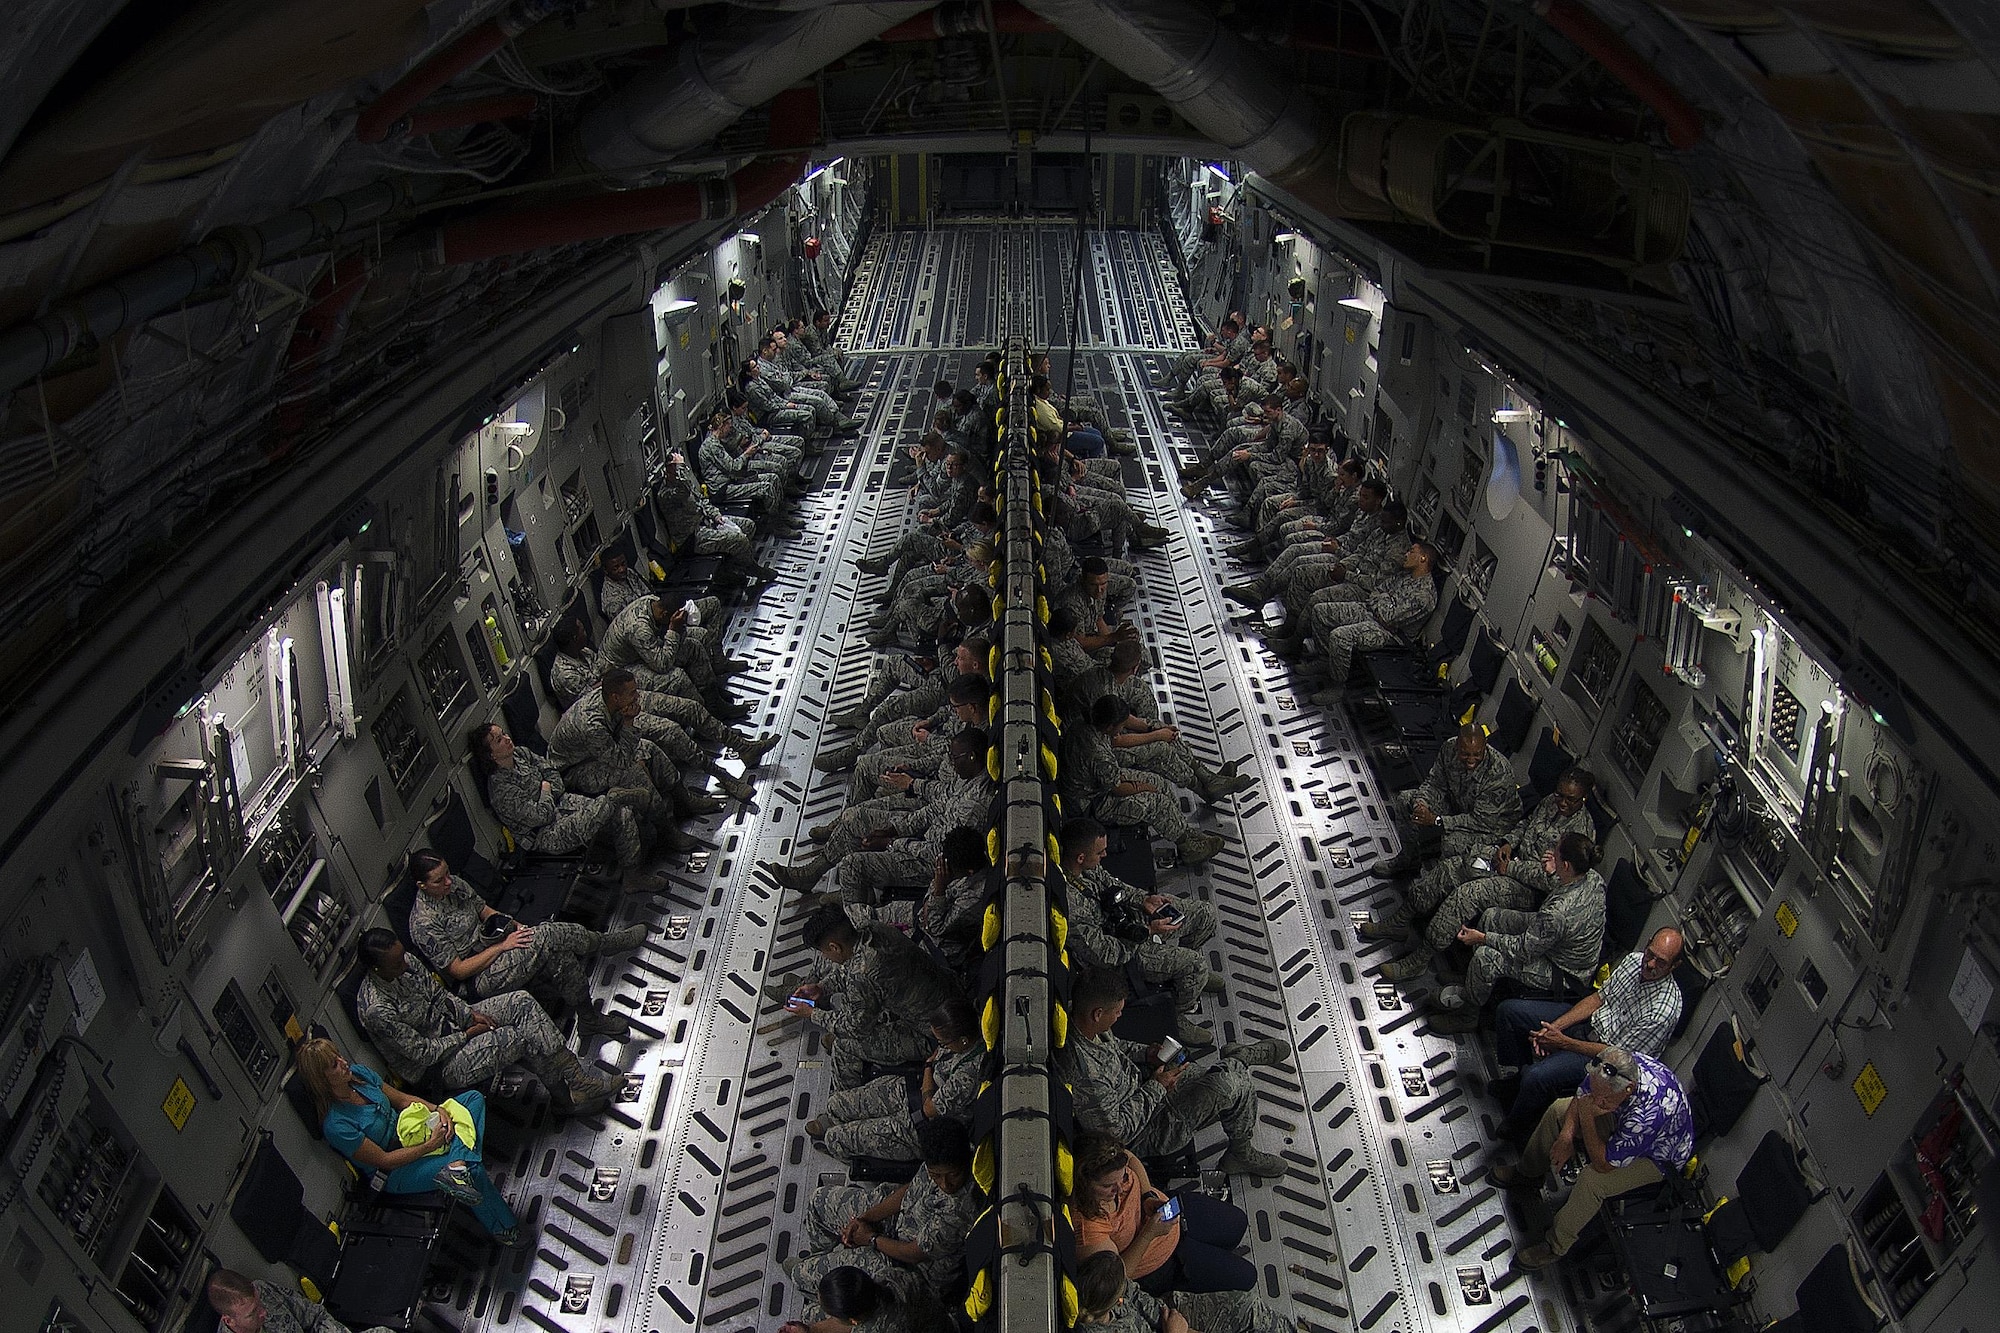 Airmen and civilians assigned to Keesler Air Force Base, Miss., participate in an incentive flight aboard a C-17 Globemaster III from Altus Air Force Base, Okla., Aug. 4, 2016. The incentive flight was part of a weeklong hurricane exercise to prepare Keesler for the current hurricane season. (U.S. Air Force photo by Senior Airman Duncan McElroy/Released)